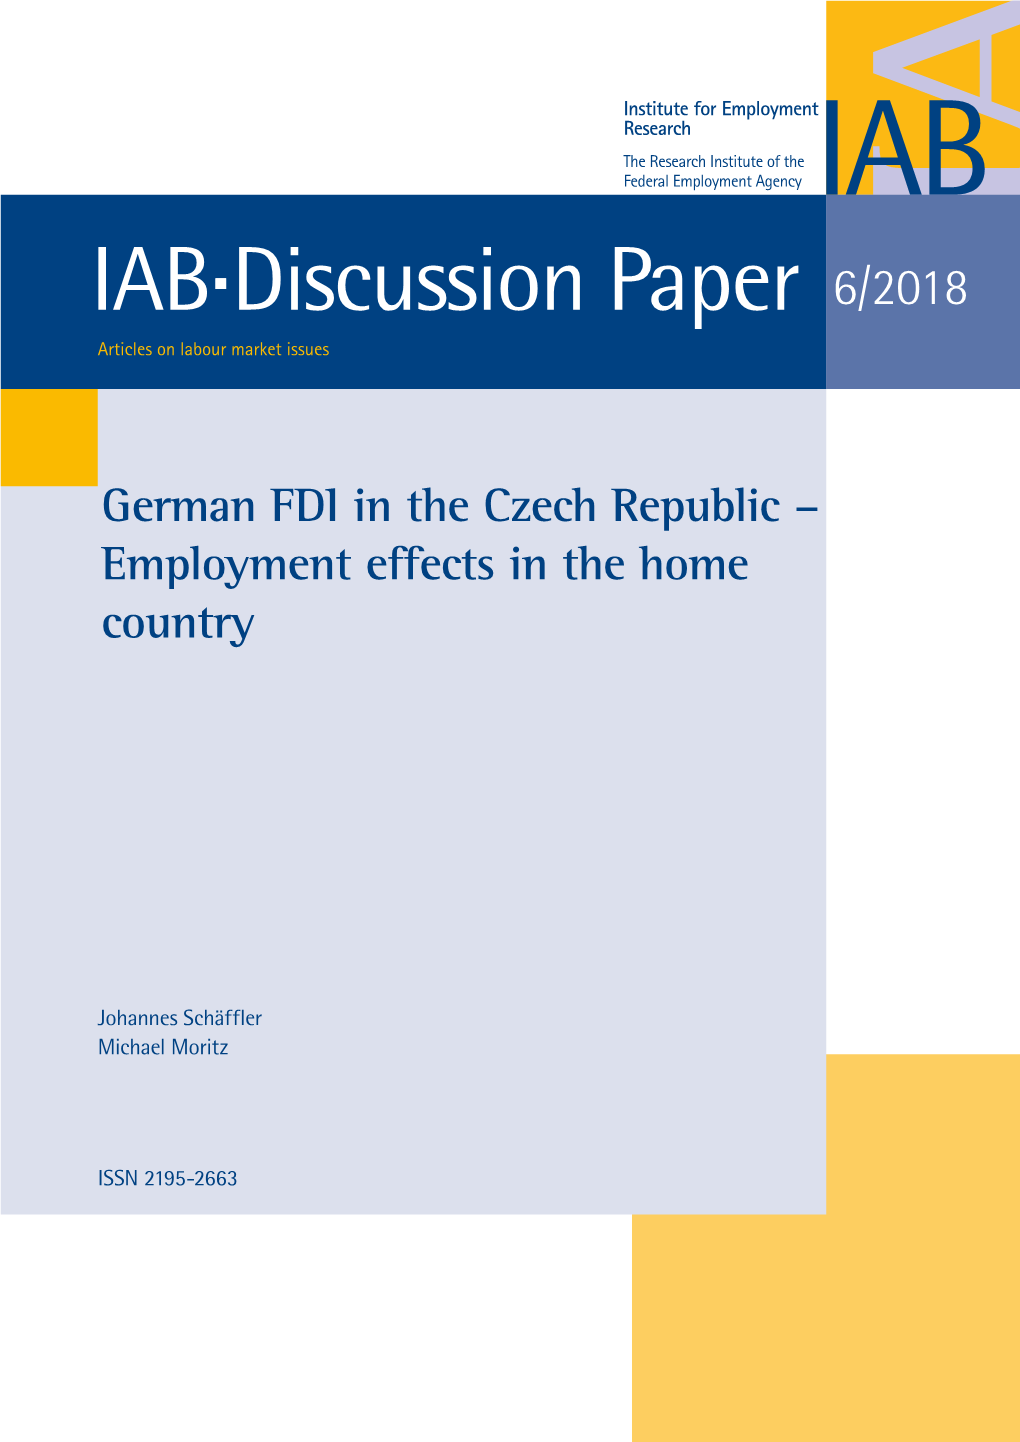 German FDI in the Czech Republic – Employment Effects in the Home Country